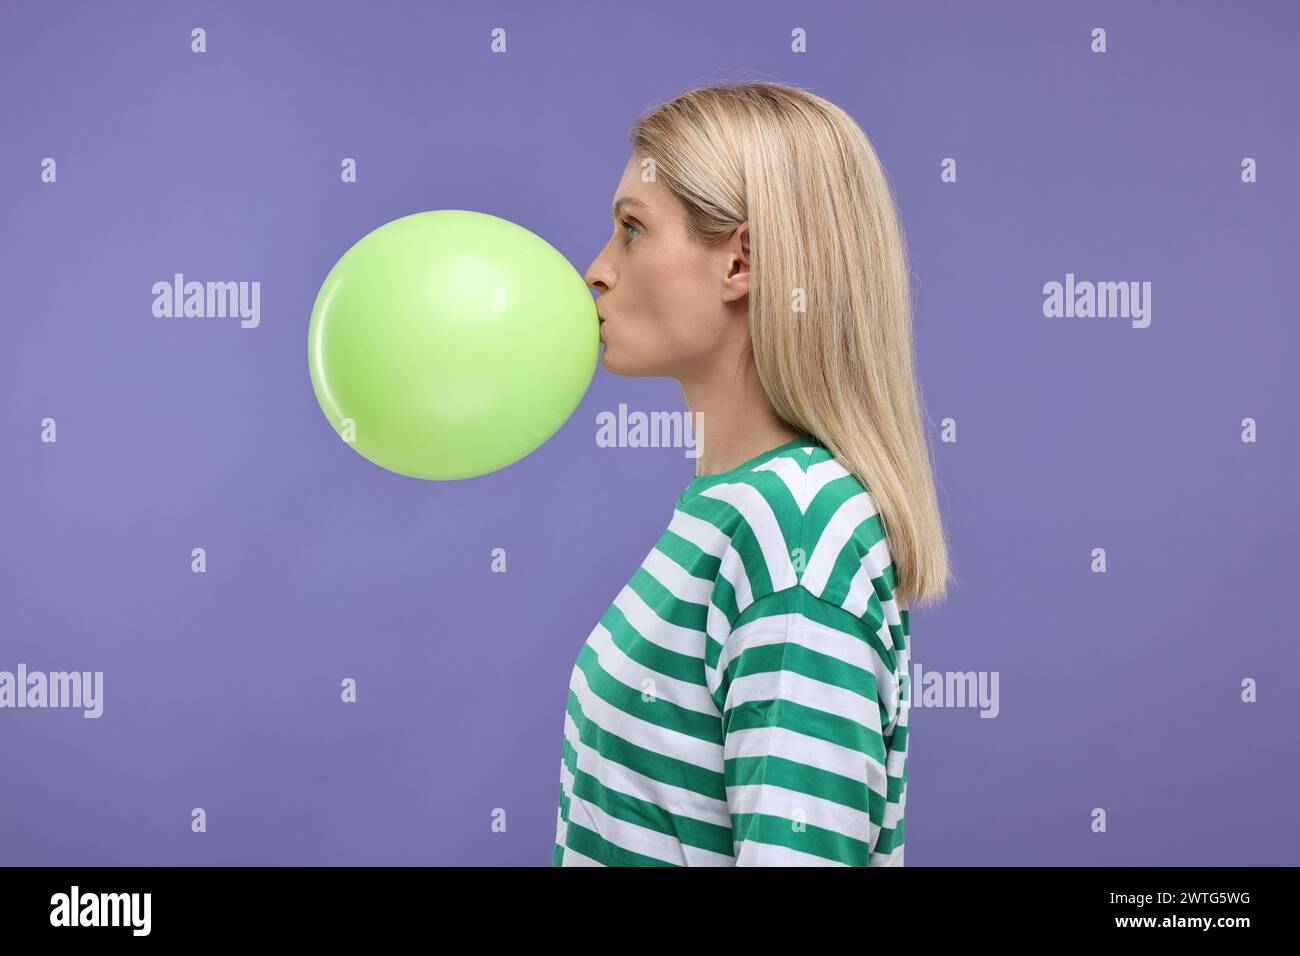 Woman blowing up balloon on violet background Stock Photo